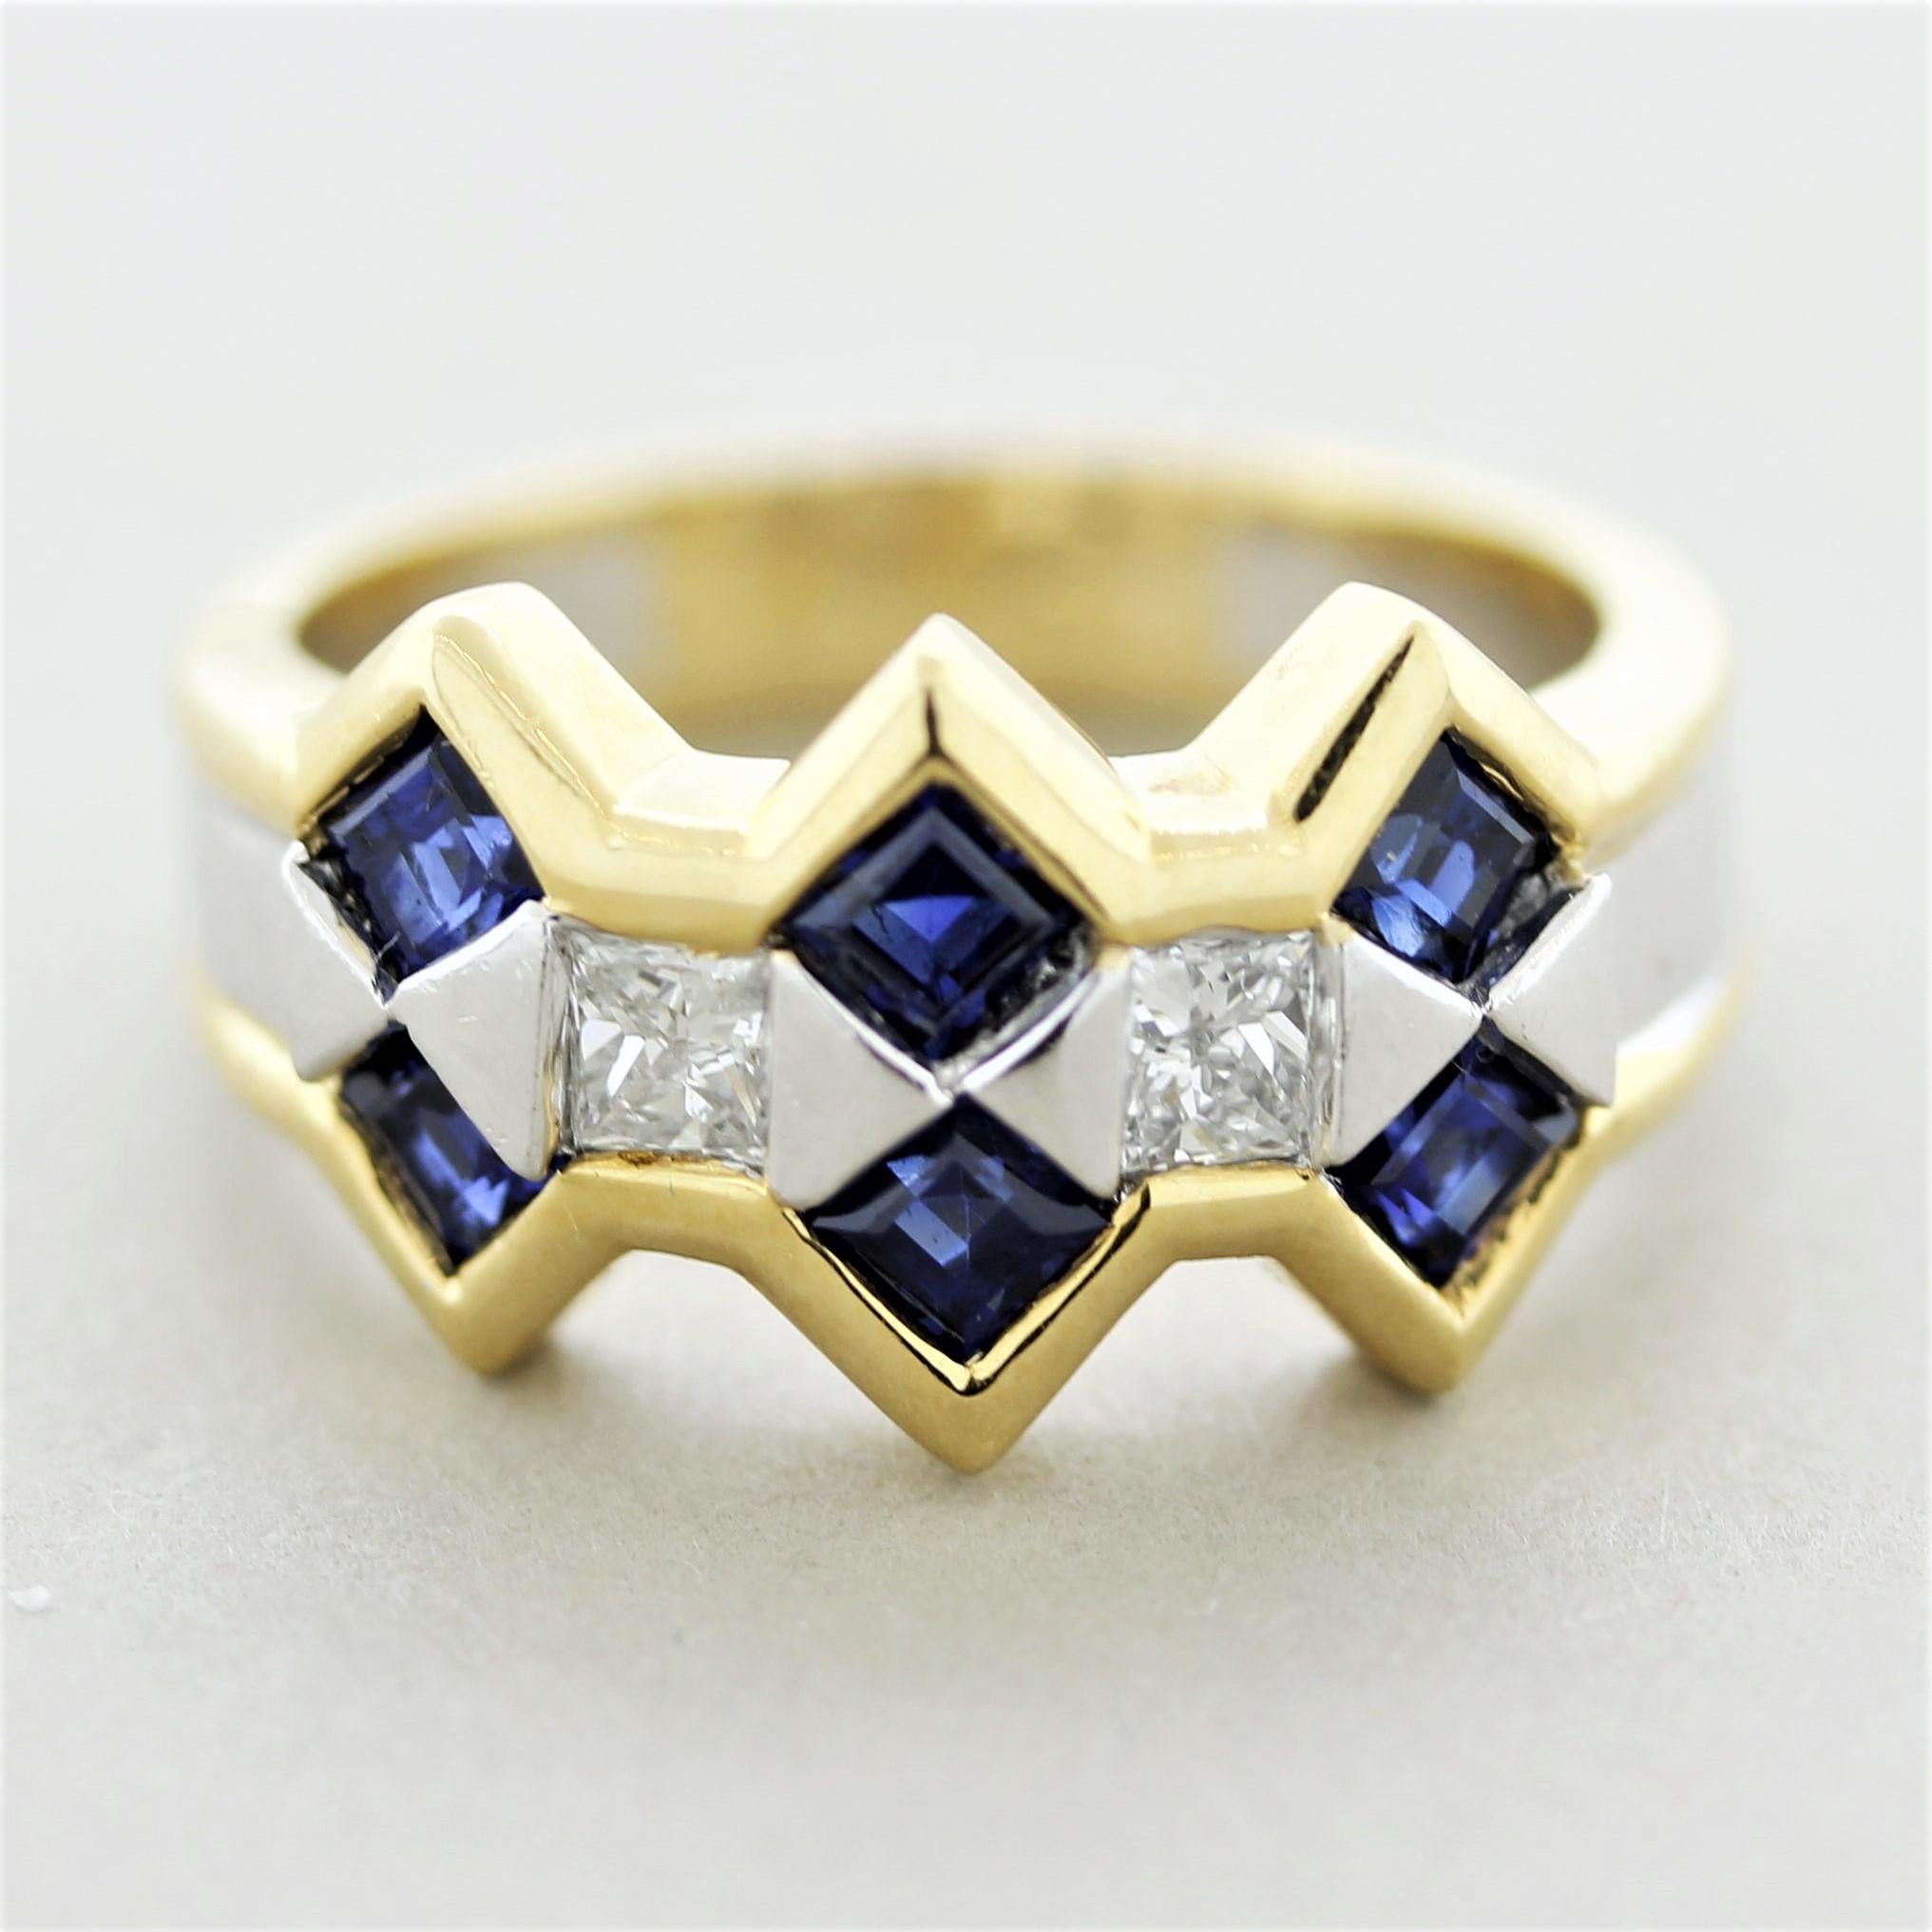 A stylish ring made in both 18k white & yellow gold! It features 6 square-shape vivid blue sapphire weighing 1.06 carats along with 2 larger princess-cut diamonds weighing 0.32 carats total. Made in 18k gold and ready to be worn.
Ring Size 6.50